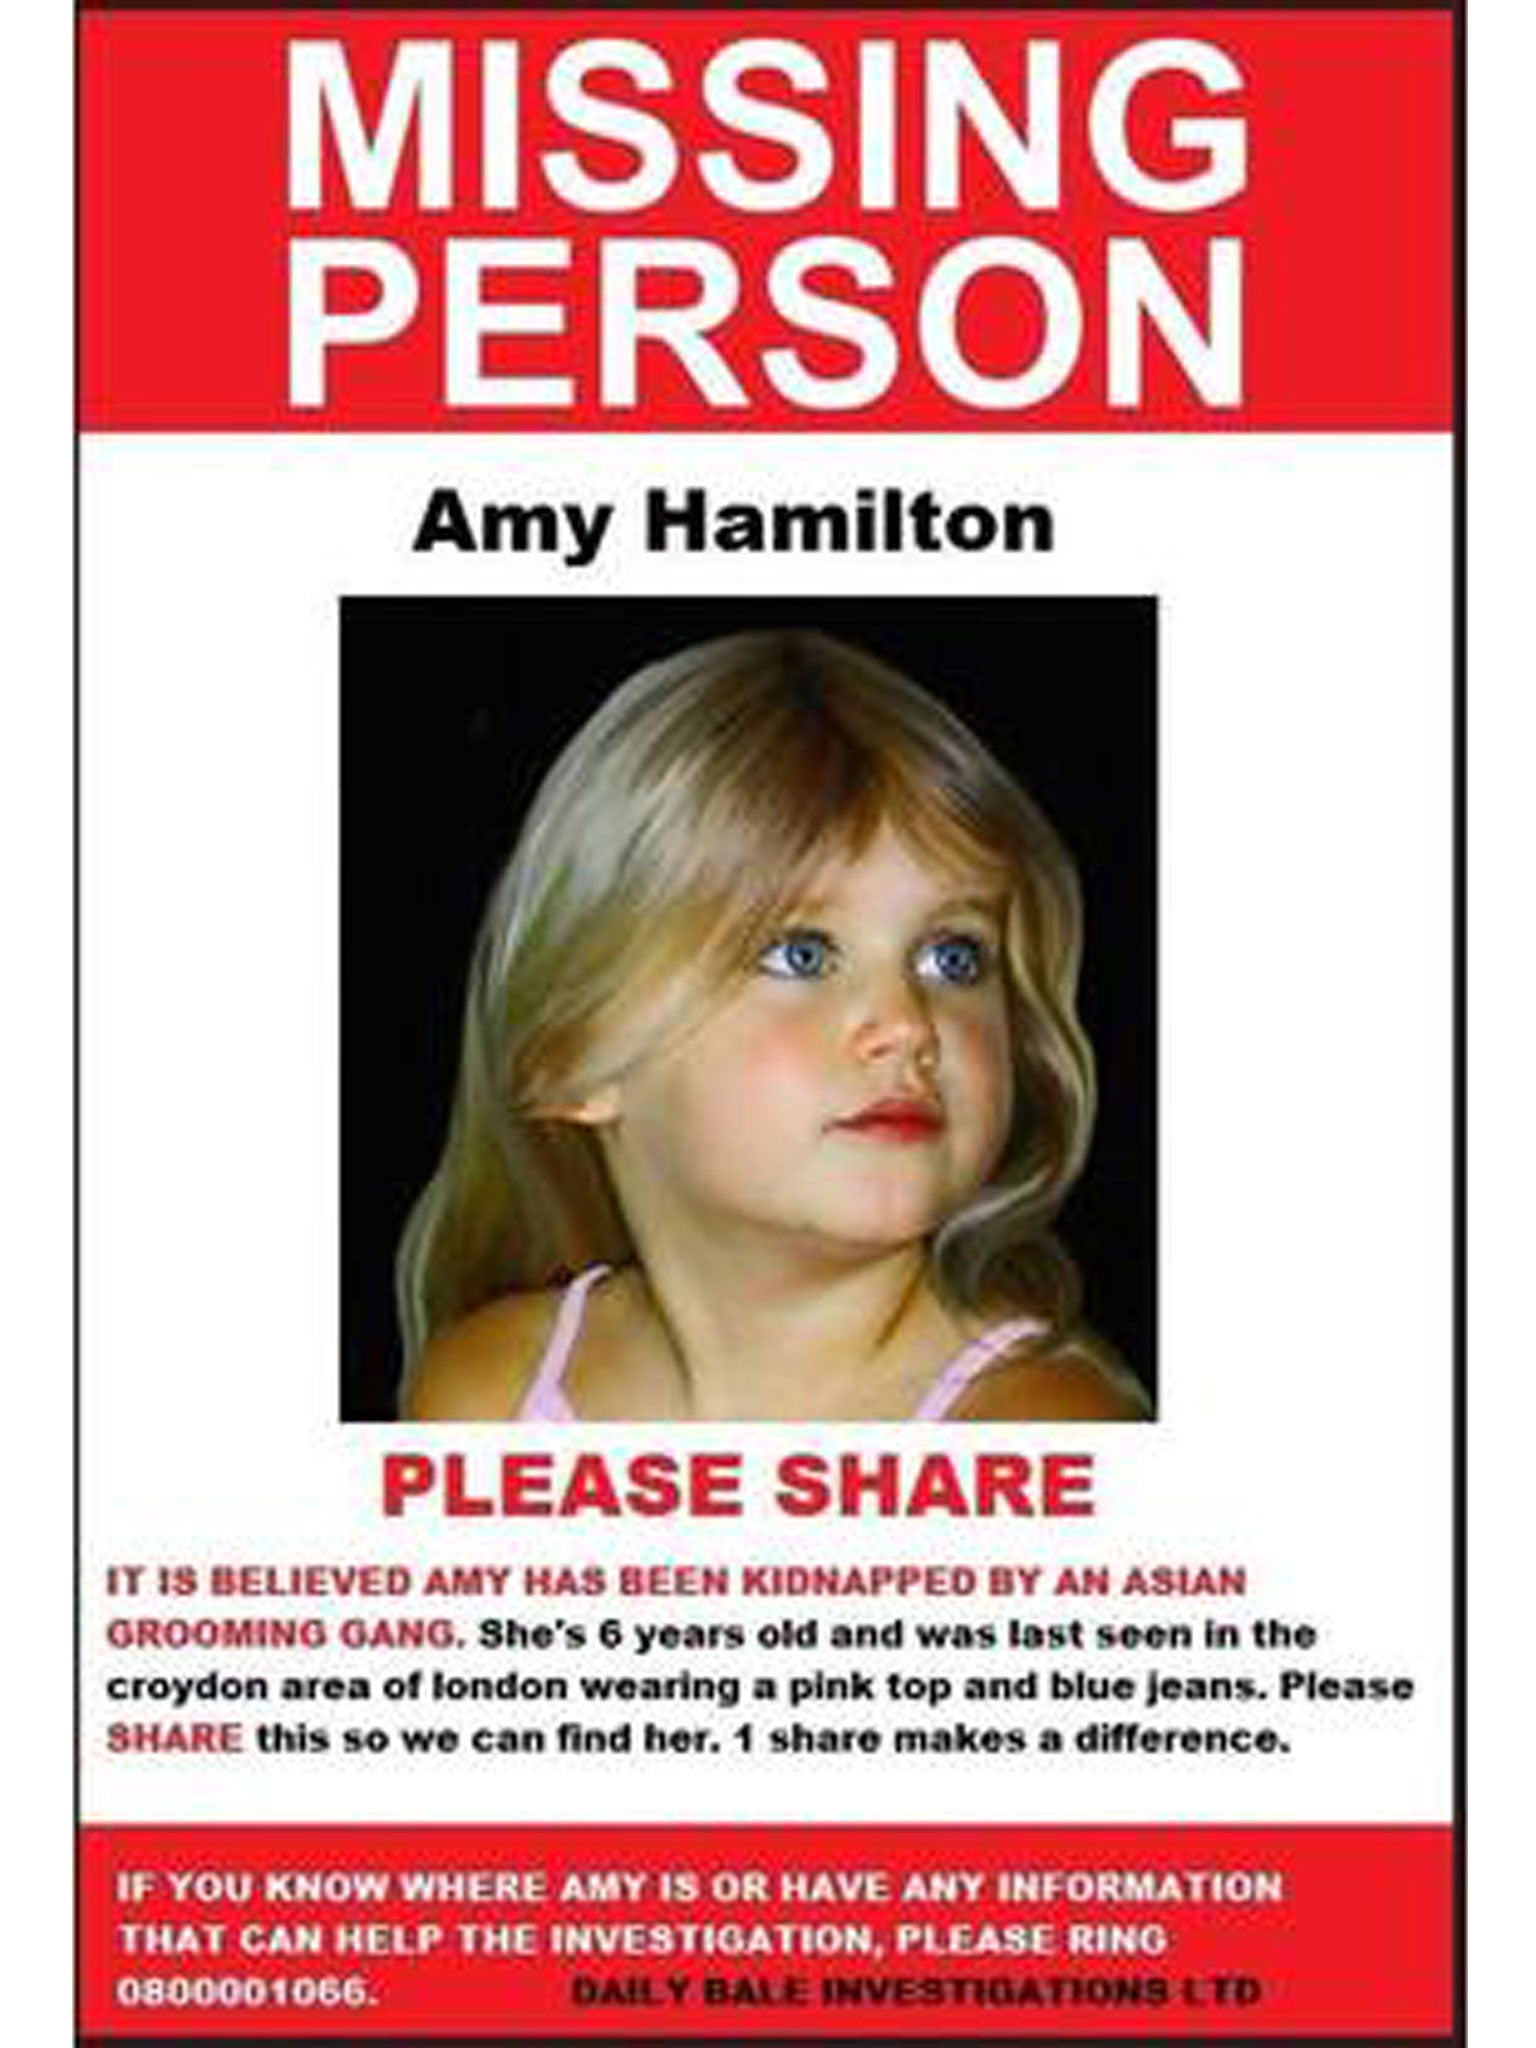 The appeal for 'missing' Amy Hamilton has been shared thousands of times in the past few days - despite being a hoax created by a right-wing organisation